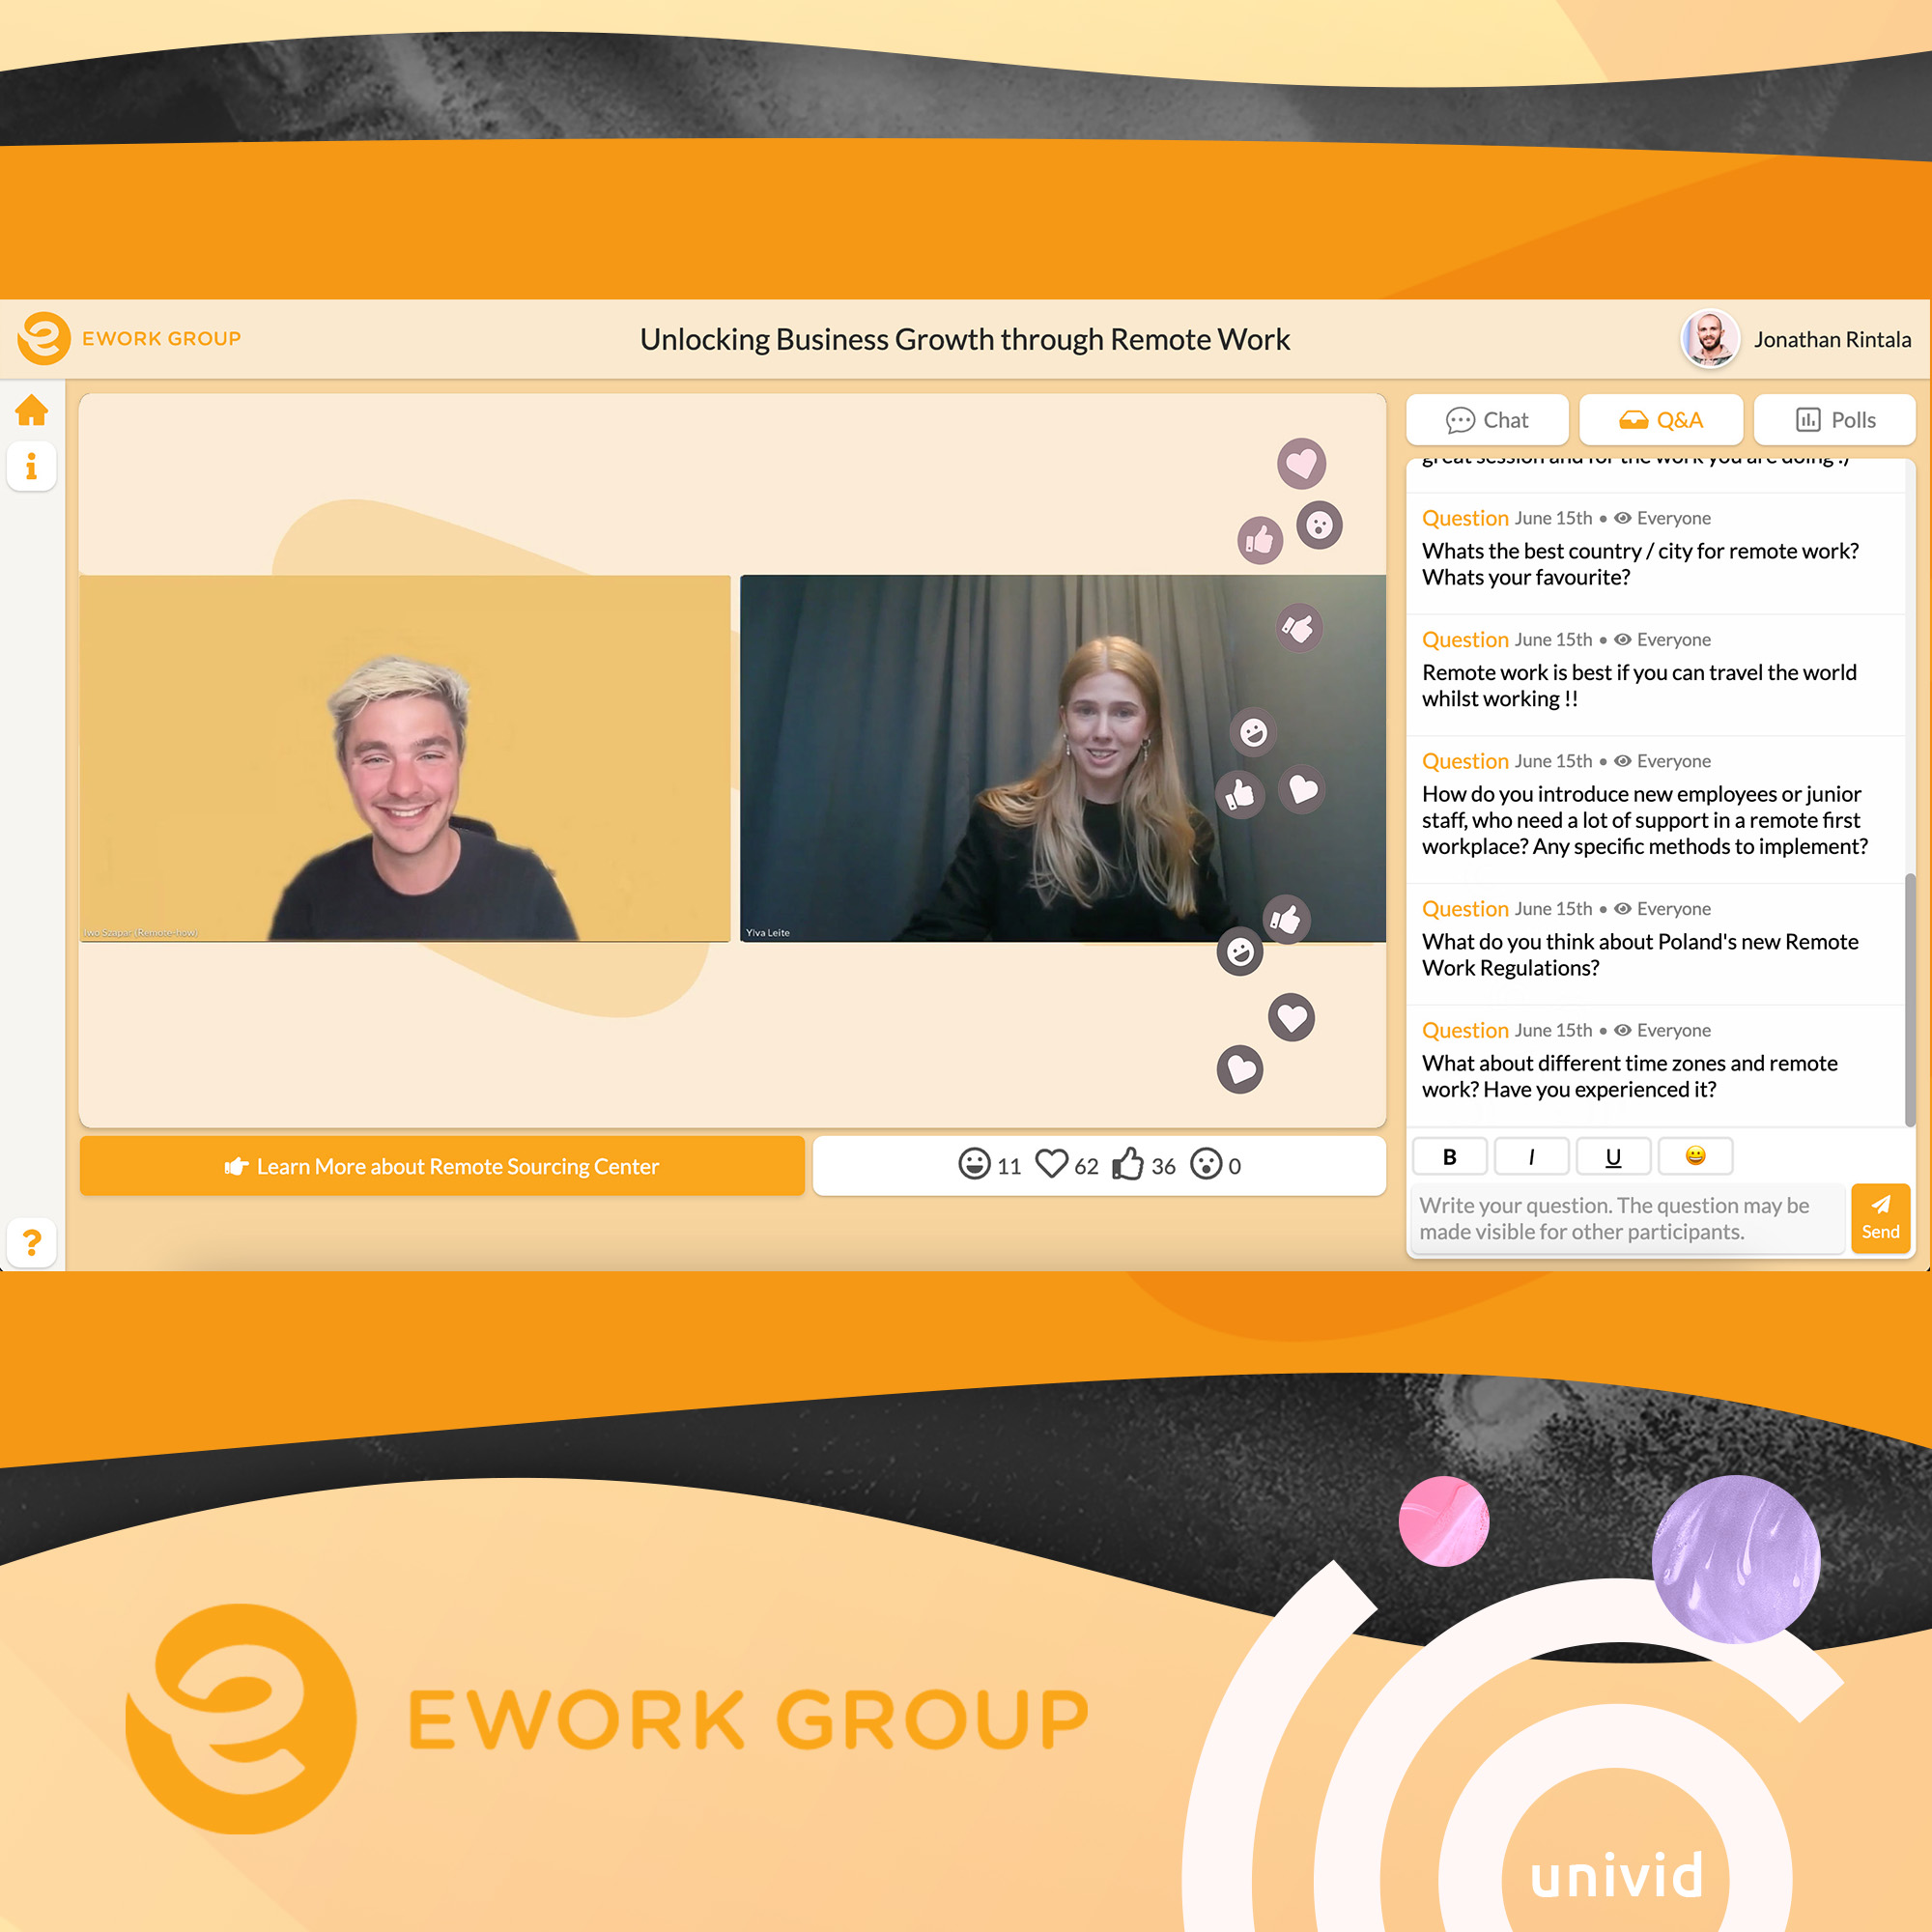 How do you grow your business to the next level with remote work? That was the topic of Ework Group's latest webinar - together with remote-first activist Iwo Szapar, CEO of Remote-how and co-founder of the Remote-First Institute, tuning in from Texas, US. With polls, Q&A, reactions and chat - this was truly an interactive fast-paced webinar with tons of curious questions being answered in real time. Also, with a value-adding CTA, smoothly leading the attendees to the next step to deep dive into free resources on remote work.